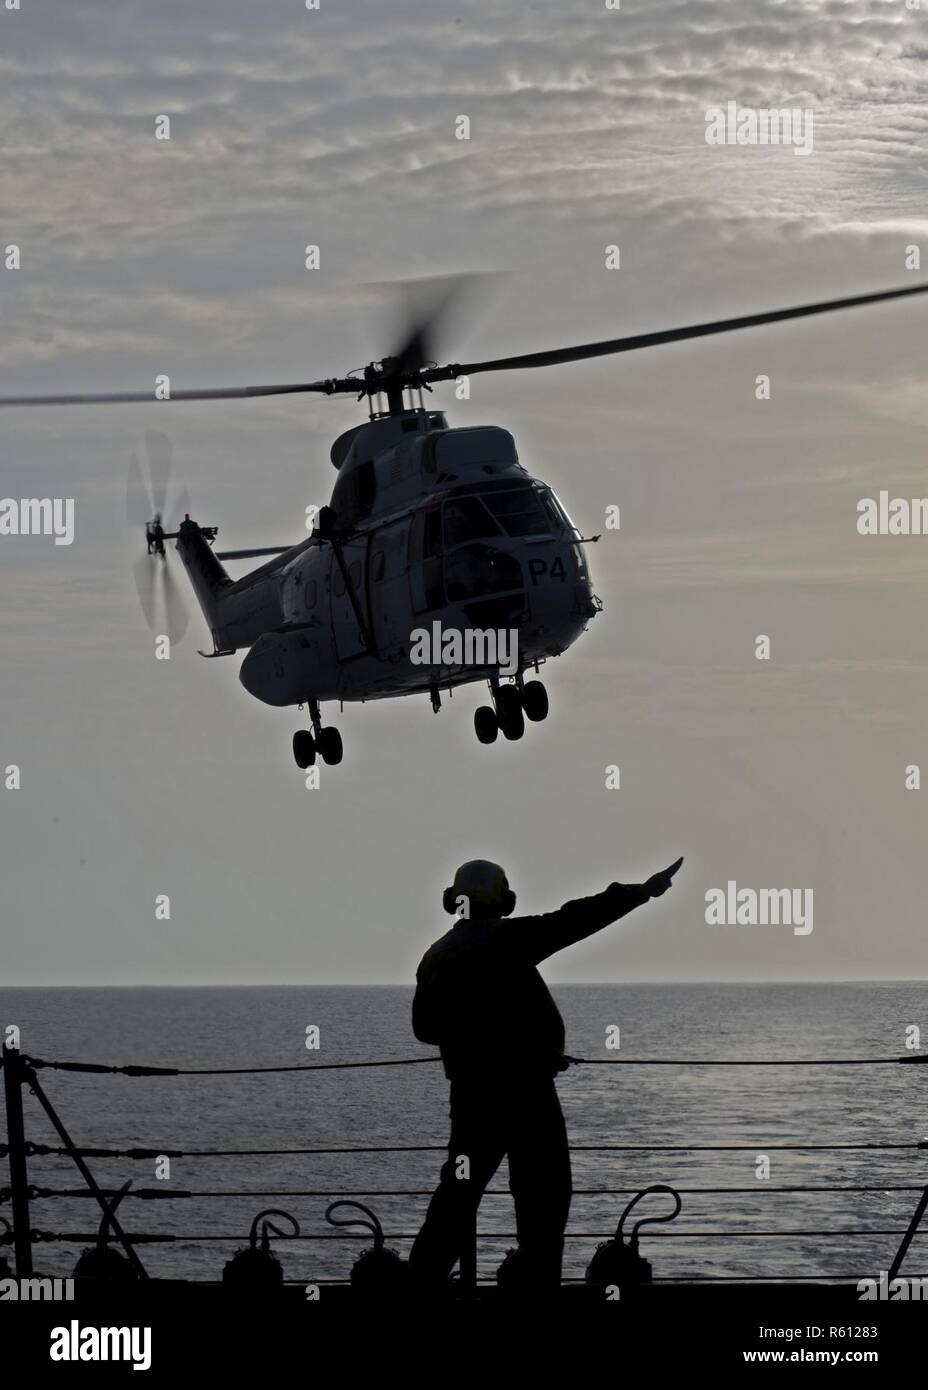 U.S. 5TH FLEET AREA OF OPERATIONS (April 30, 2017) Boatswain’s Mate 2nd Class Daniel Martinez-Lebron signals to an AS-332 Super Puma helicopter after launching from the flight deck of the guided-missile destroyer USS Truxtun (DDG 103) during a vertical replenishment with Military Sealift Command fleet replenishment oiler USNS Washington Chambers (T-AKE 11). Truxtun is deployed to the U.S. 5th Fleet area of operations in support of maritime security operations designed to reassure allies and partners and preserve the freedom of navigation and the free flow of commerce in the region. Stock Photo